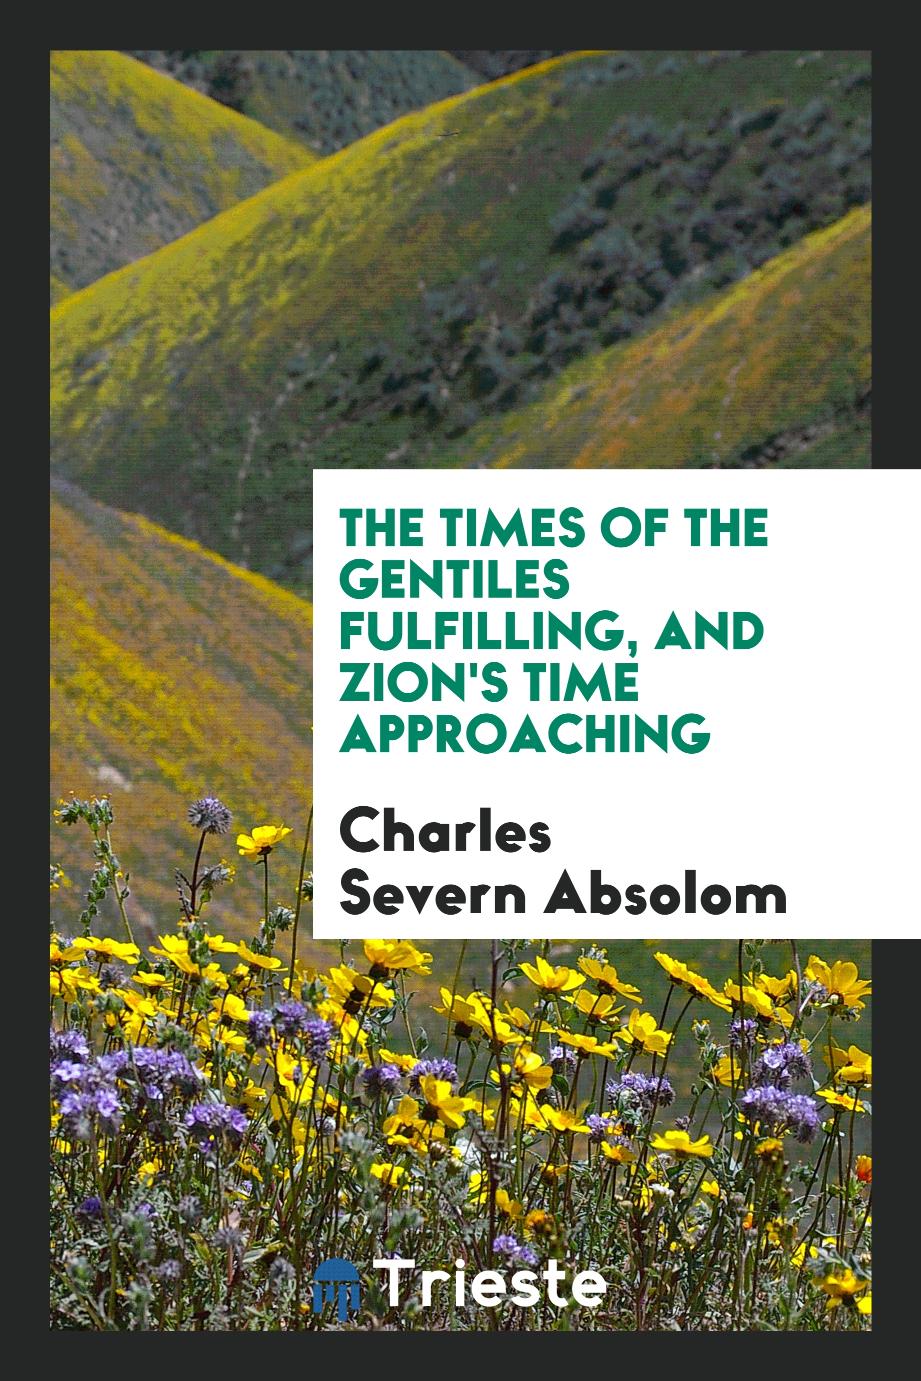 The Times of the Gentiles Fulfilling, and Zion's Time Approaching